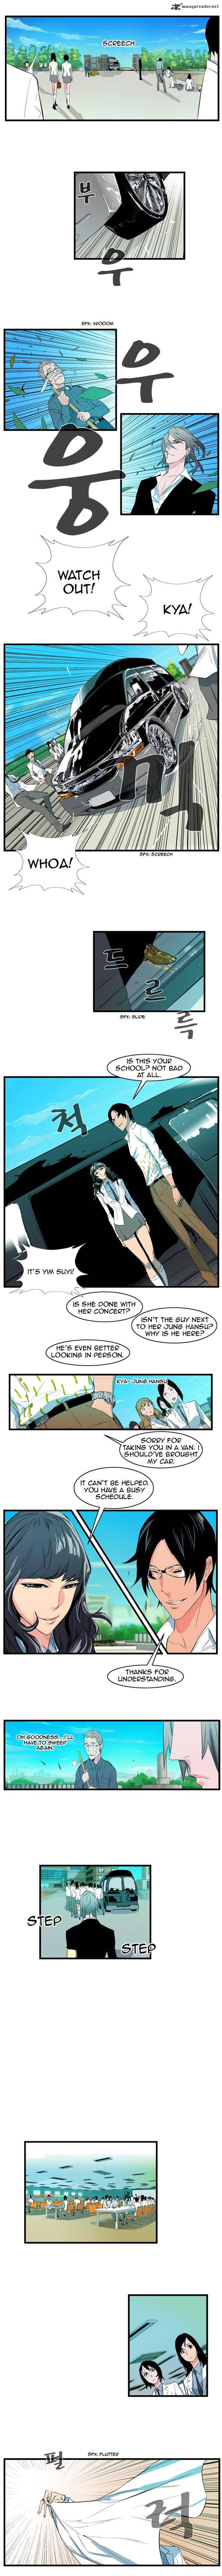 Noblesse Chapter 94 Page 2